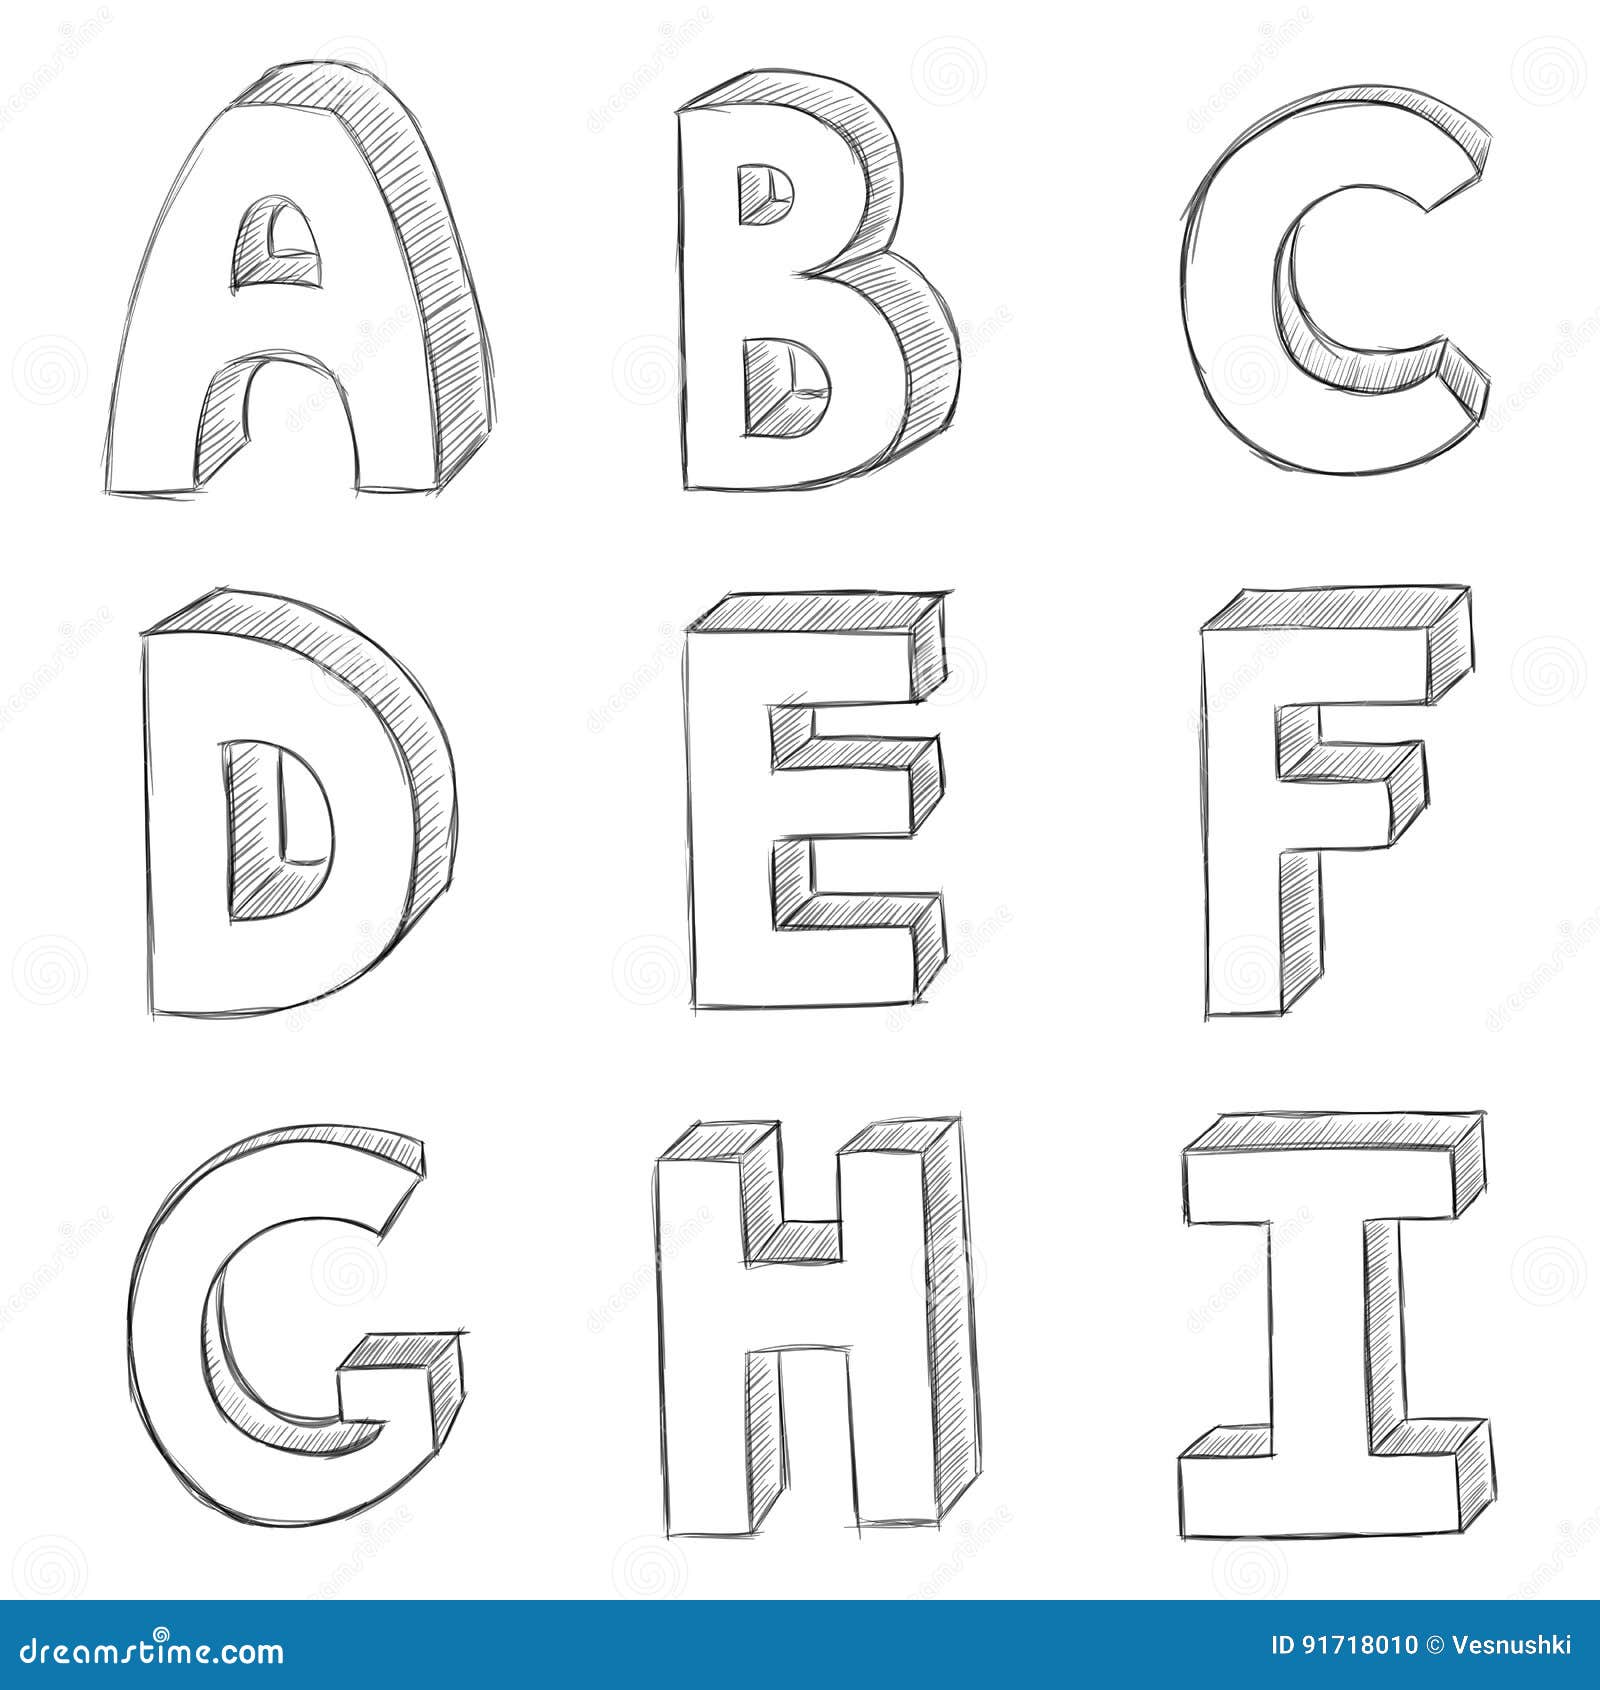 Drawing Through the Alphabet Letter L - The Activity Mom